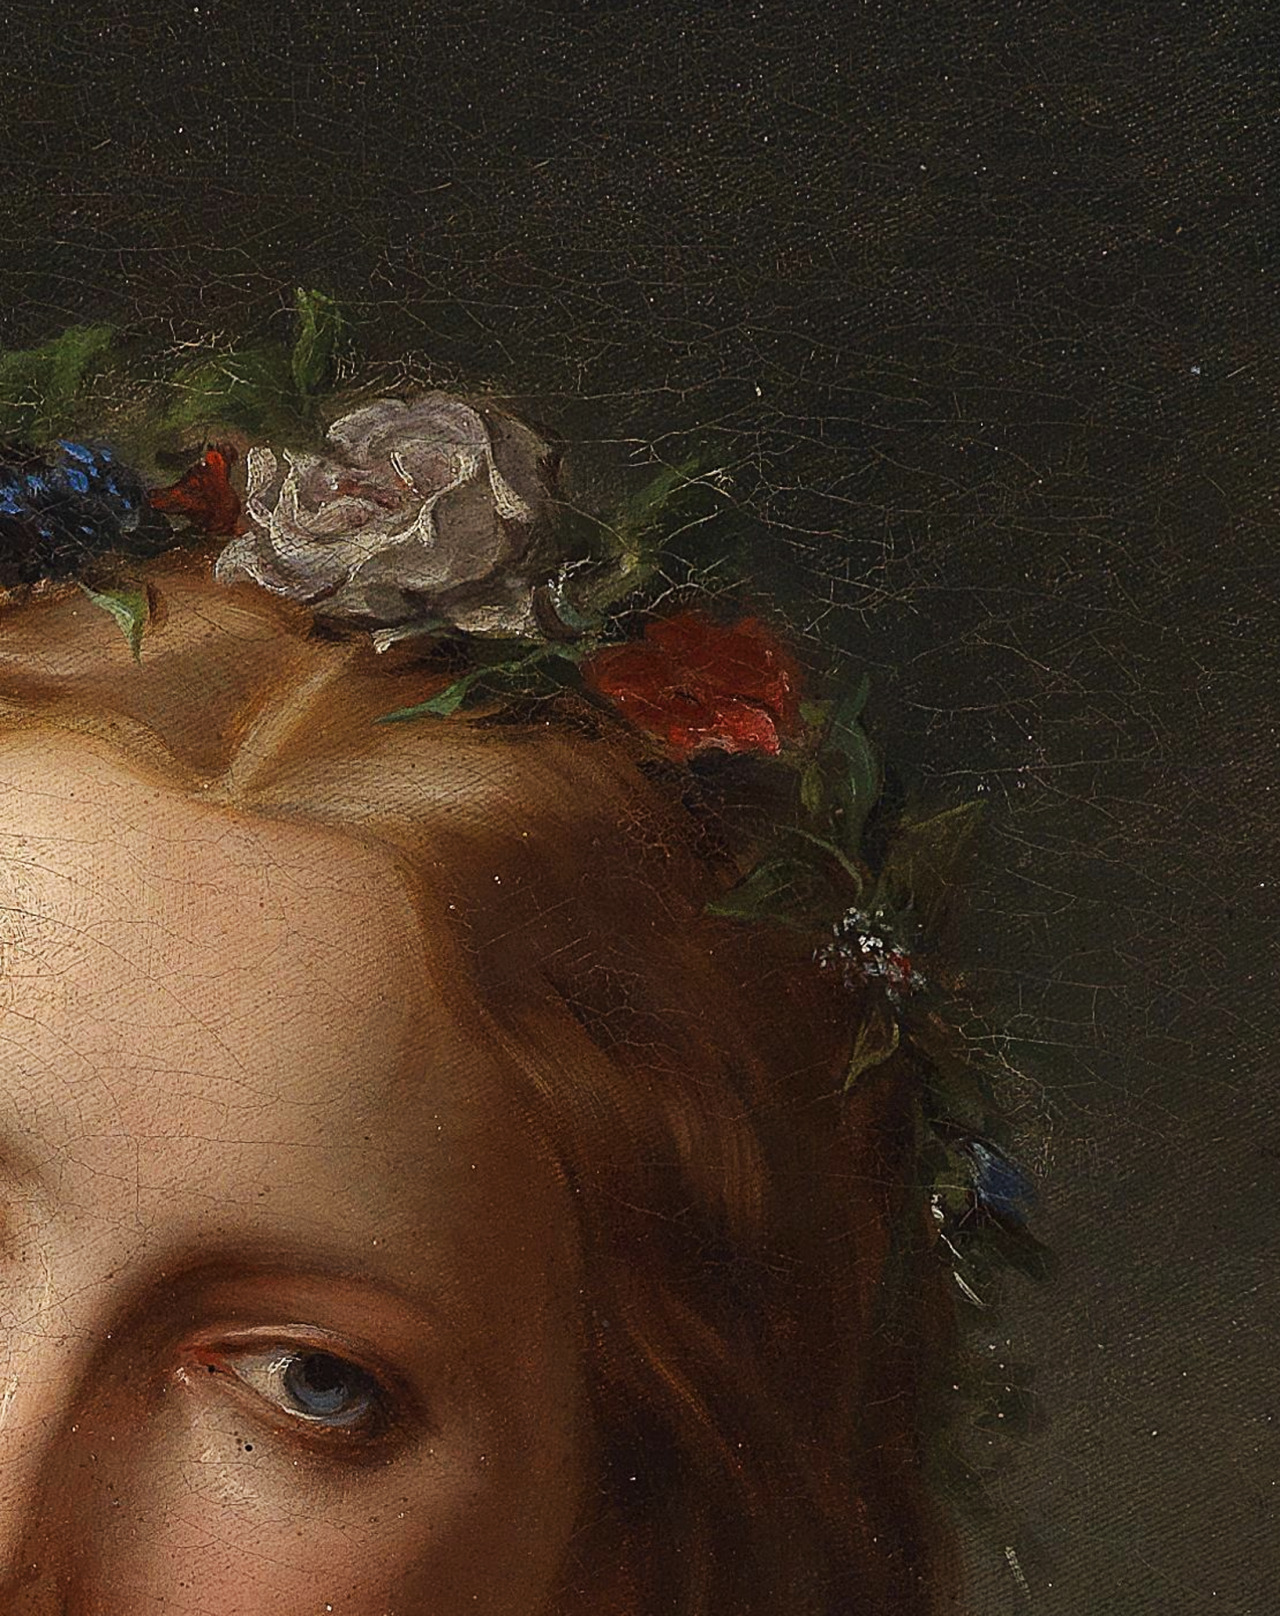 greuze:

Unknown Artist, Daydreaming (Detail), 19th Century
